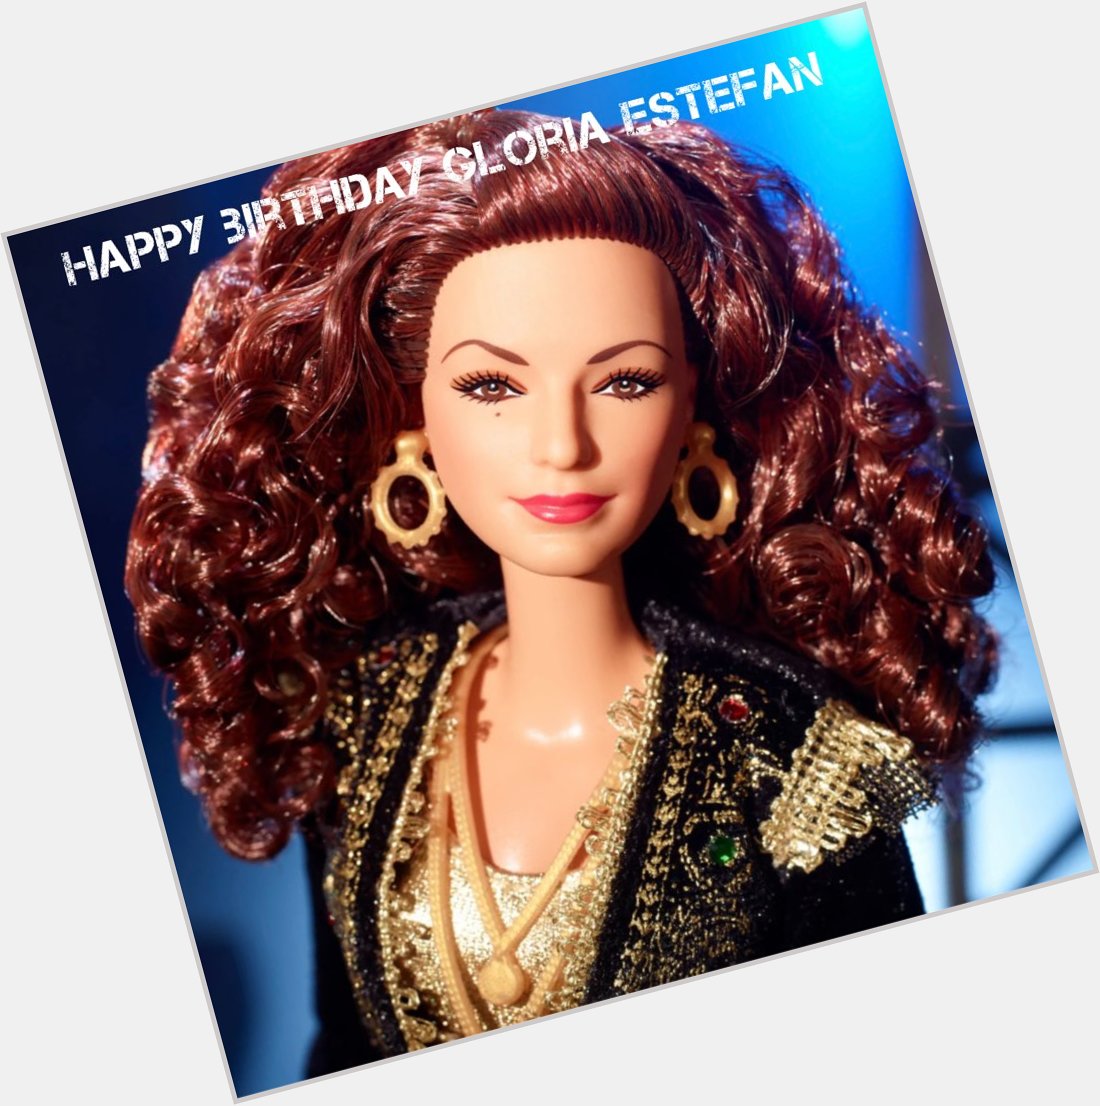  Happy Birthday Gloria Estefan, enjoy your day with family, friends and pets!     